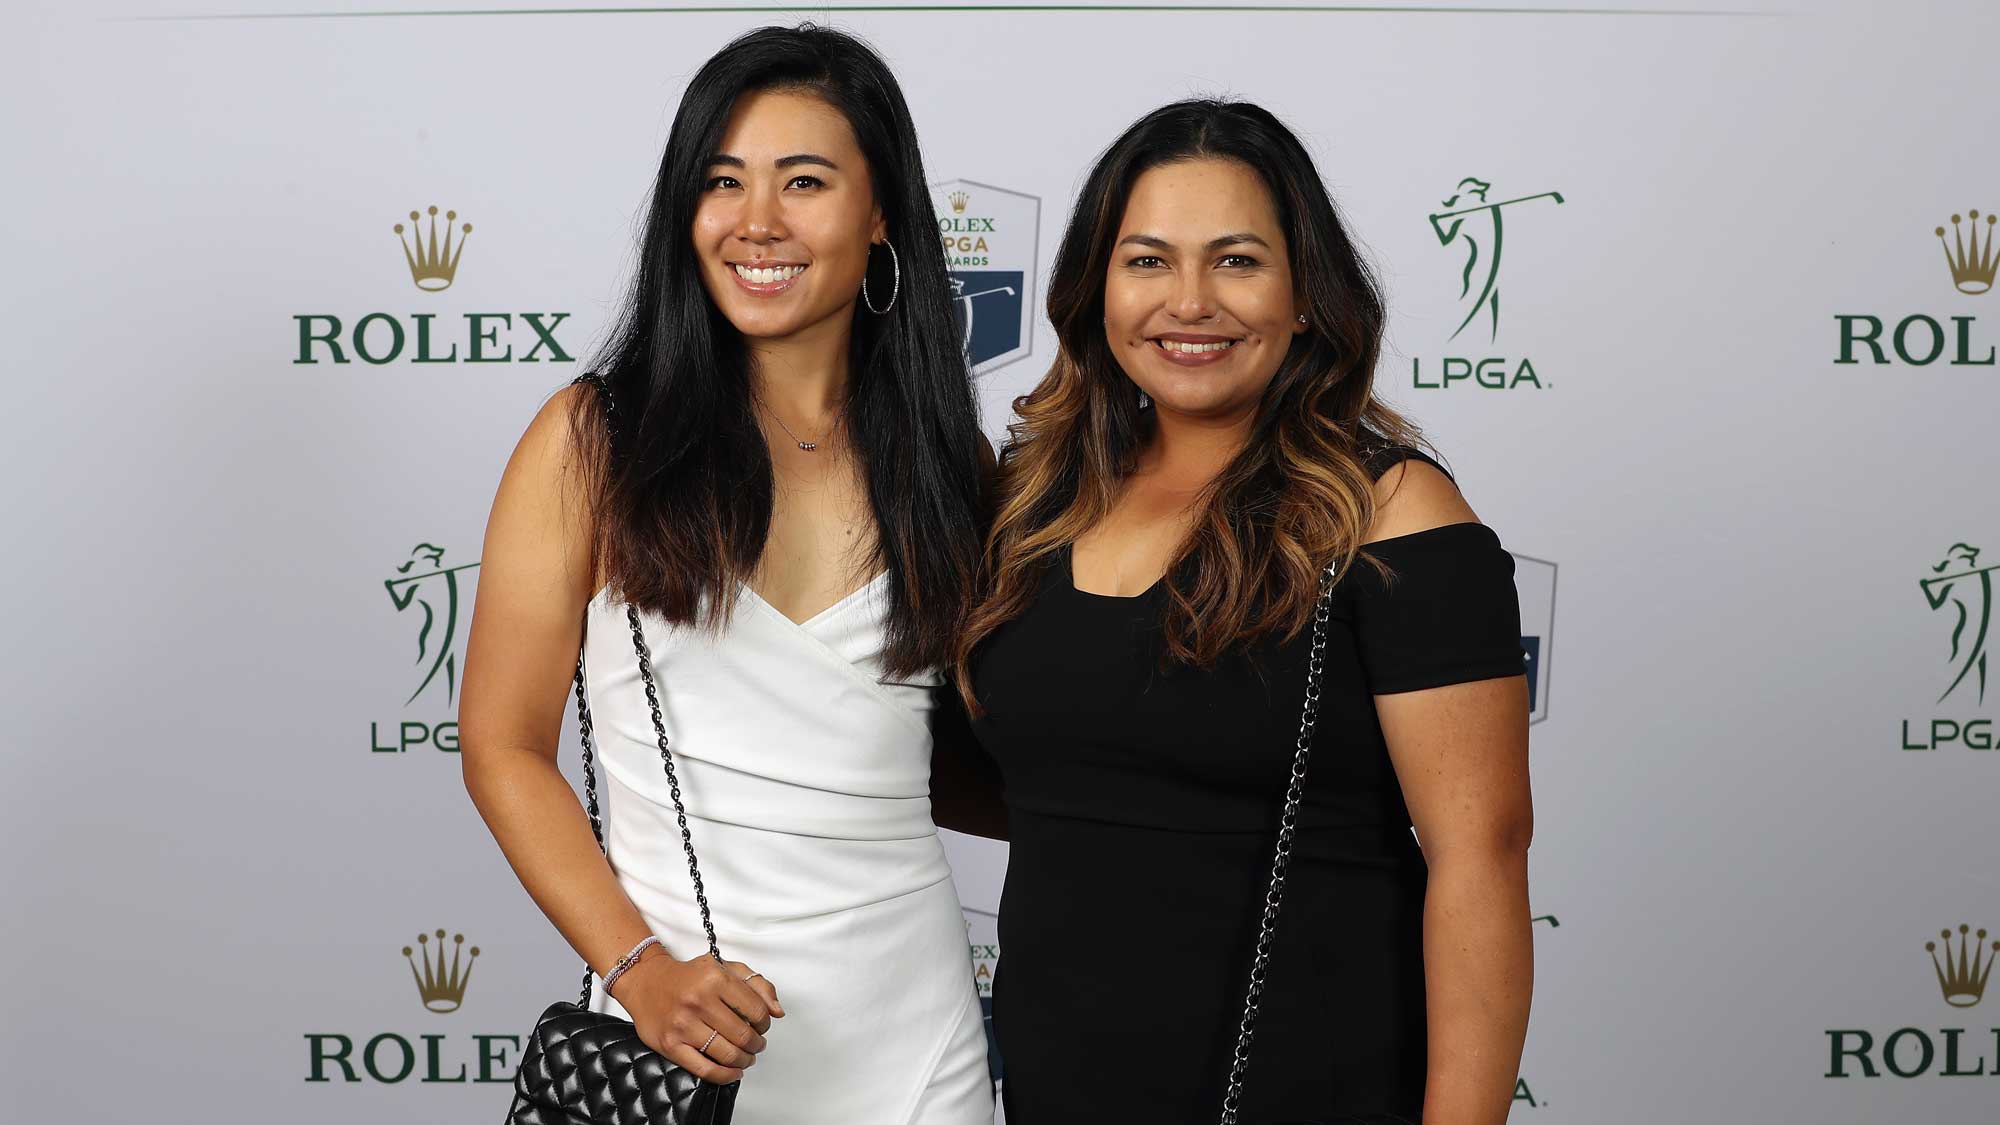 2017 Rolex First-Time Winner Danielle Kang of the United States (L) poses with Lizette Salas of the United States (R) during the LPGA Rolex Players Awards at The Ritz-Carlton Golf Resort 